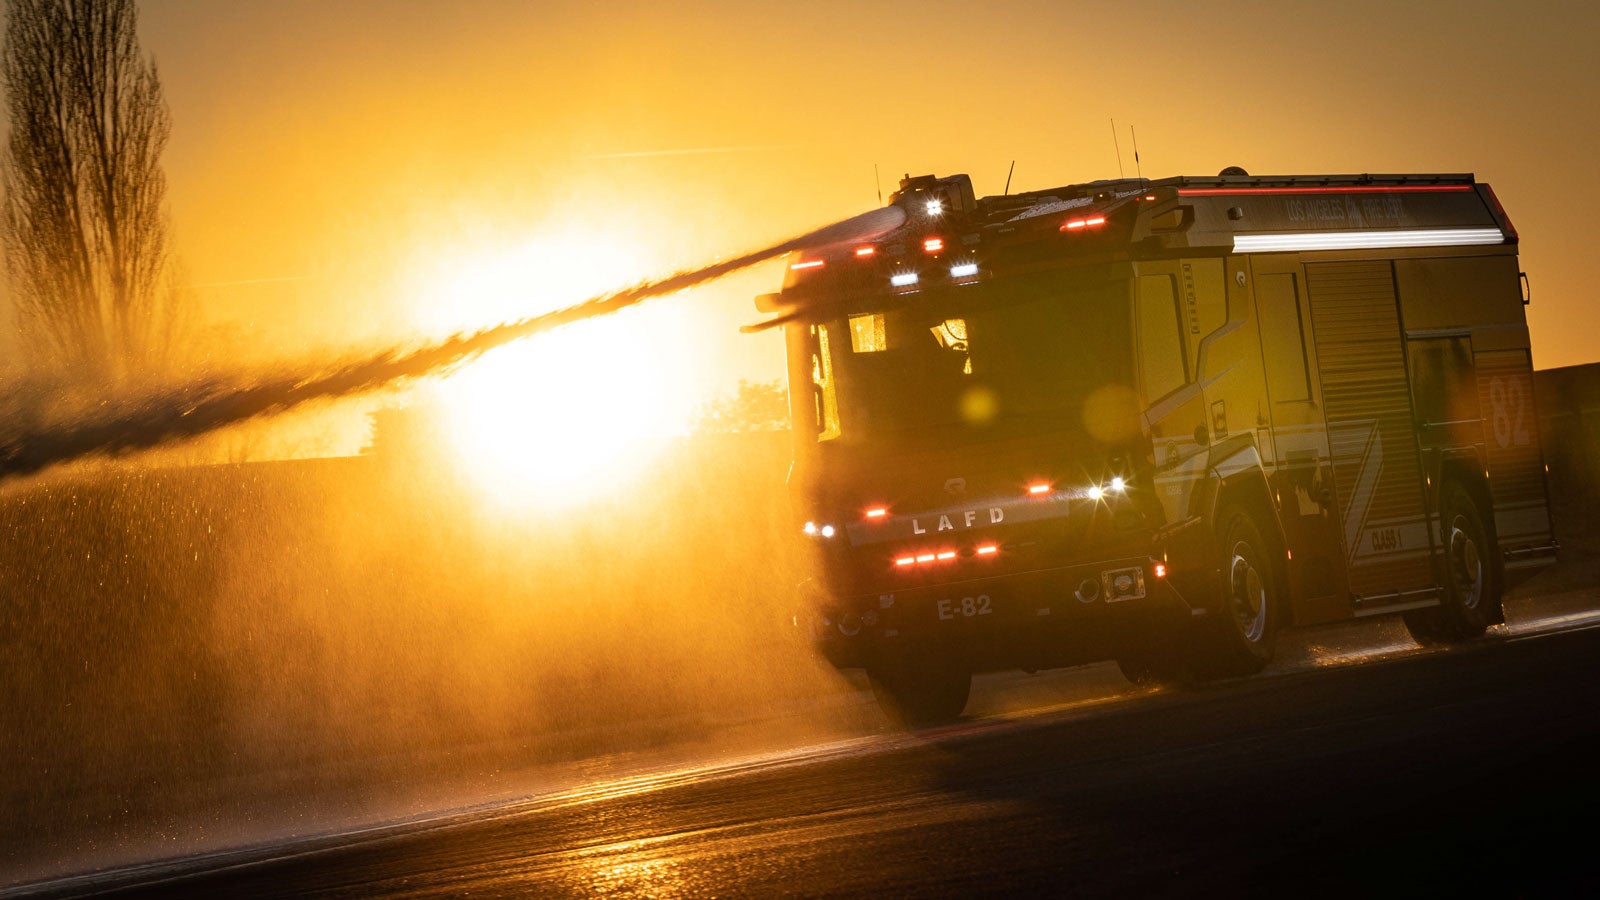 America’s First Electric Fire Truck Is On the Job in Los Angeles